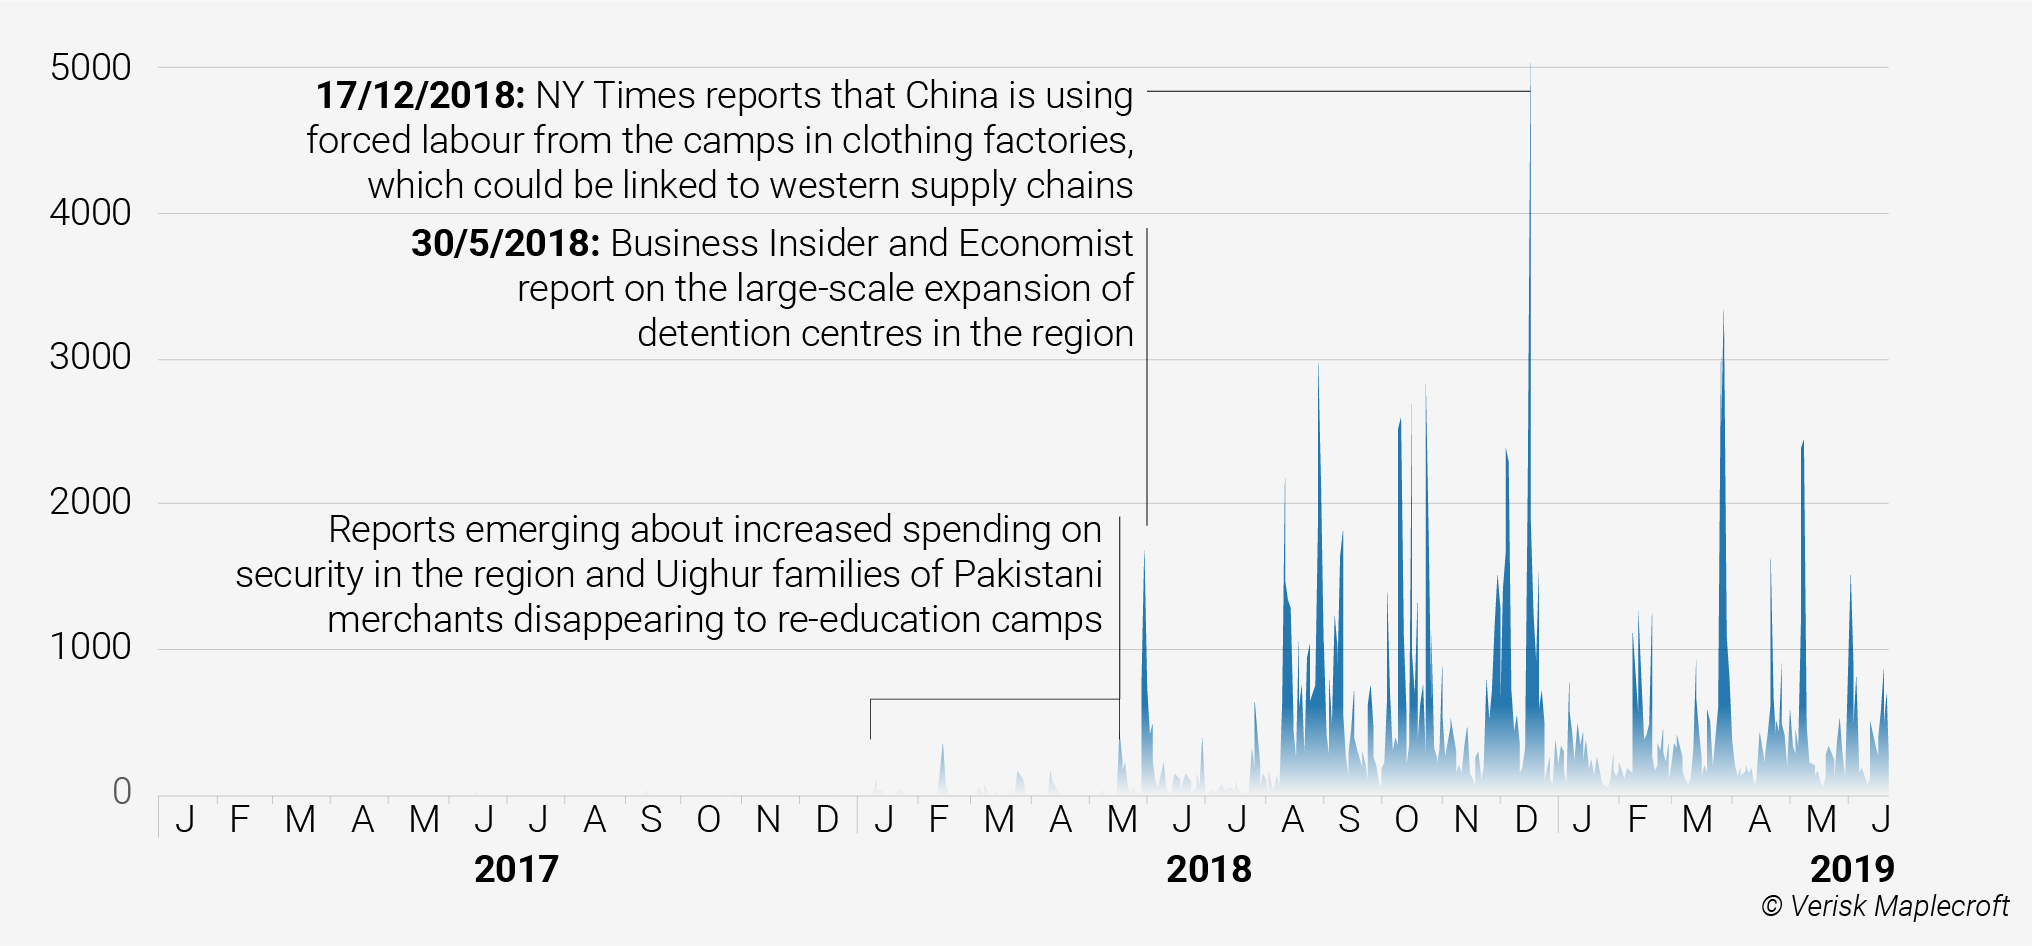 Twitter mentions of forced labour in Xinjiang reveal risks for apparel companies